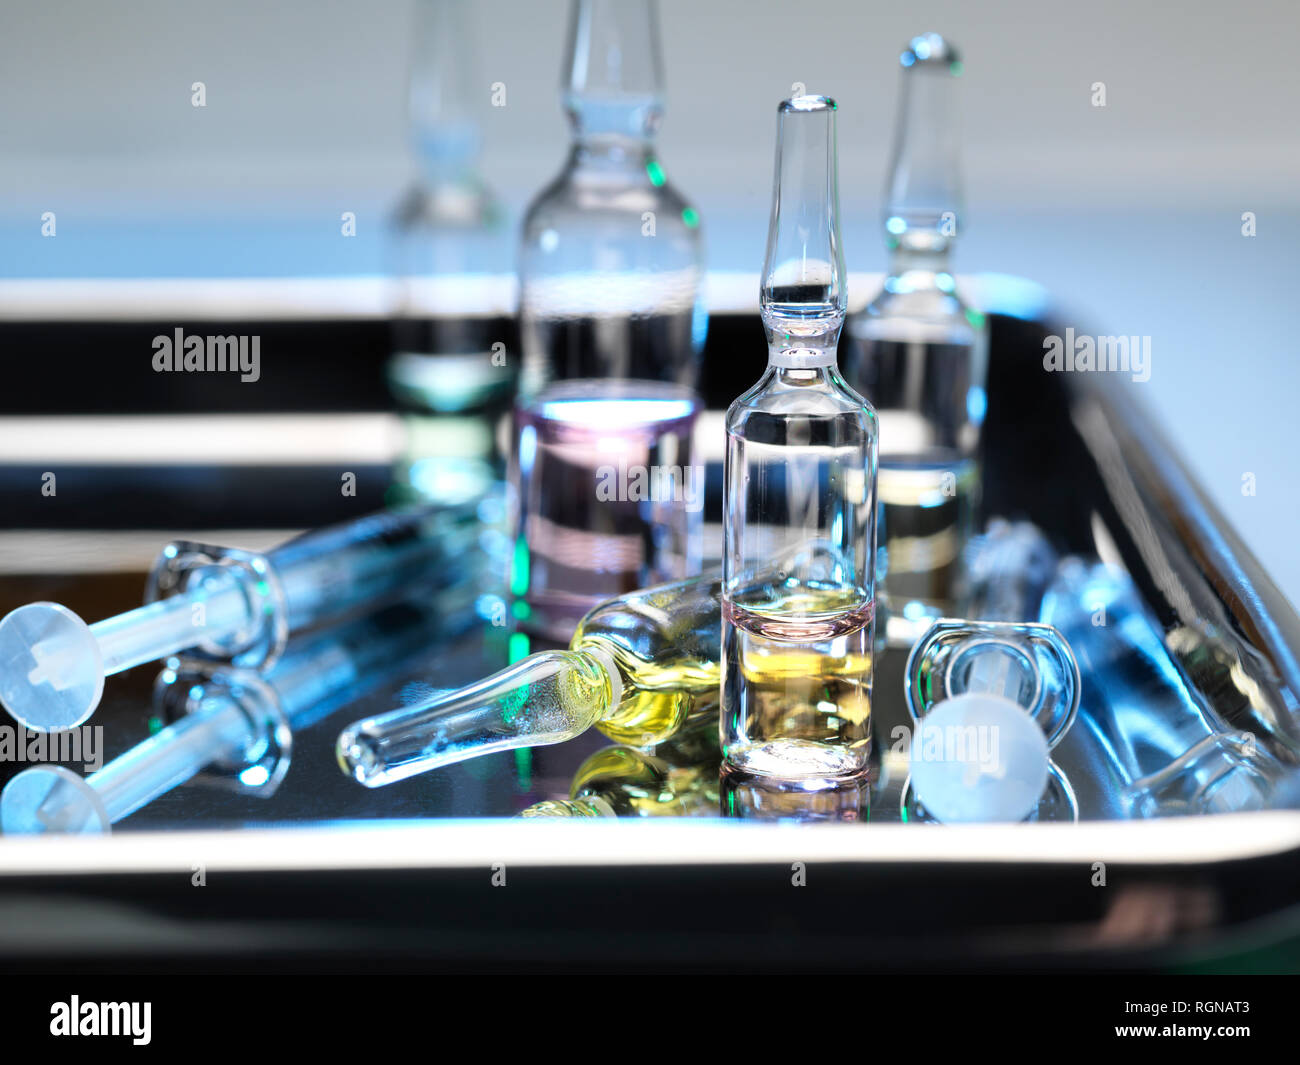 Ampules and phials containing a drug dose next to syringes on a surgical tray Stock Photo